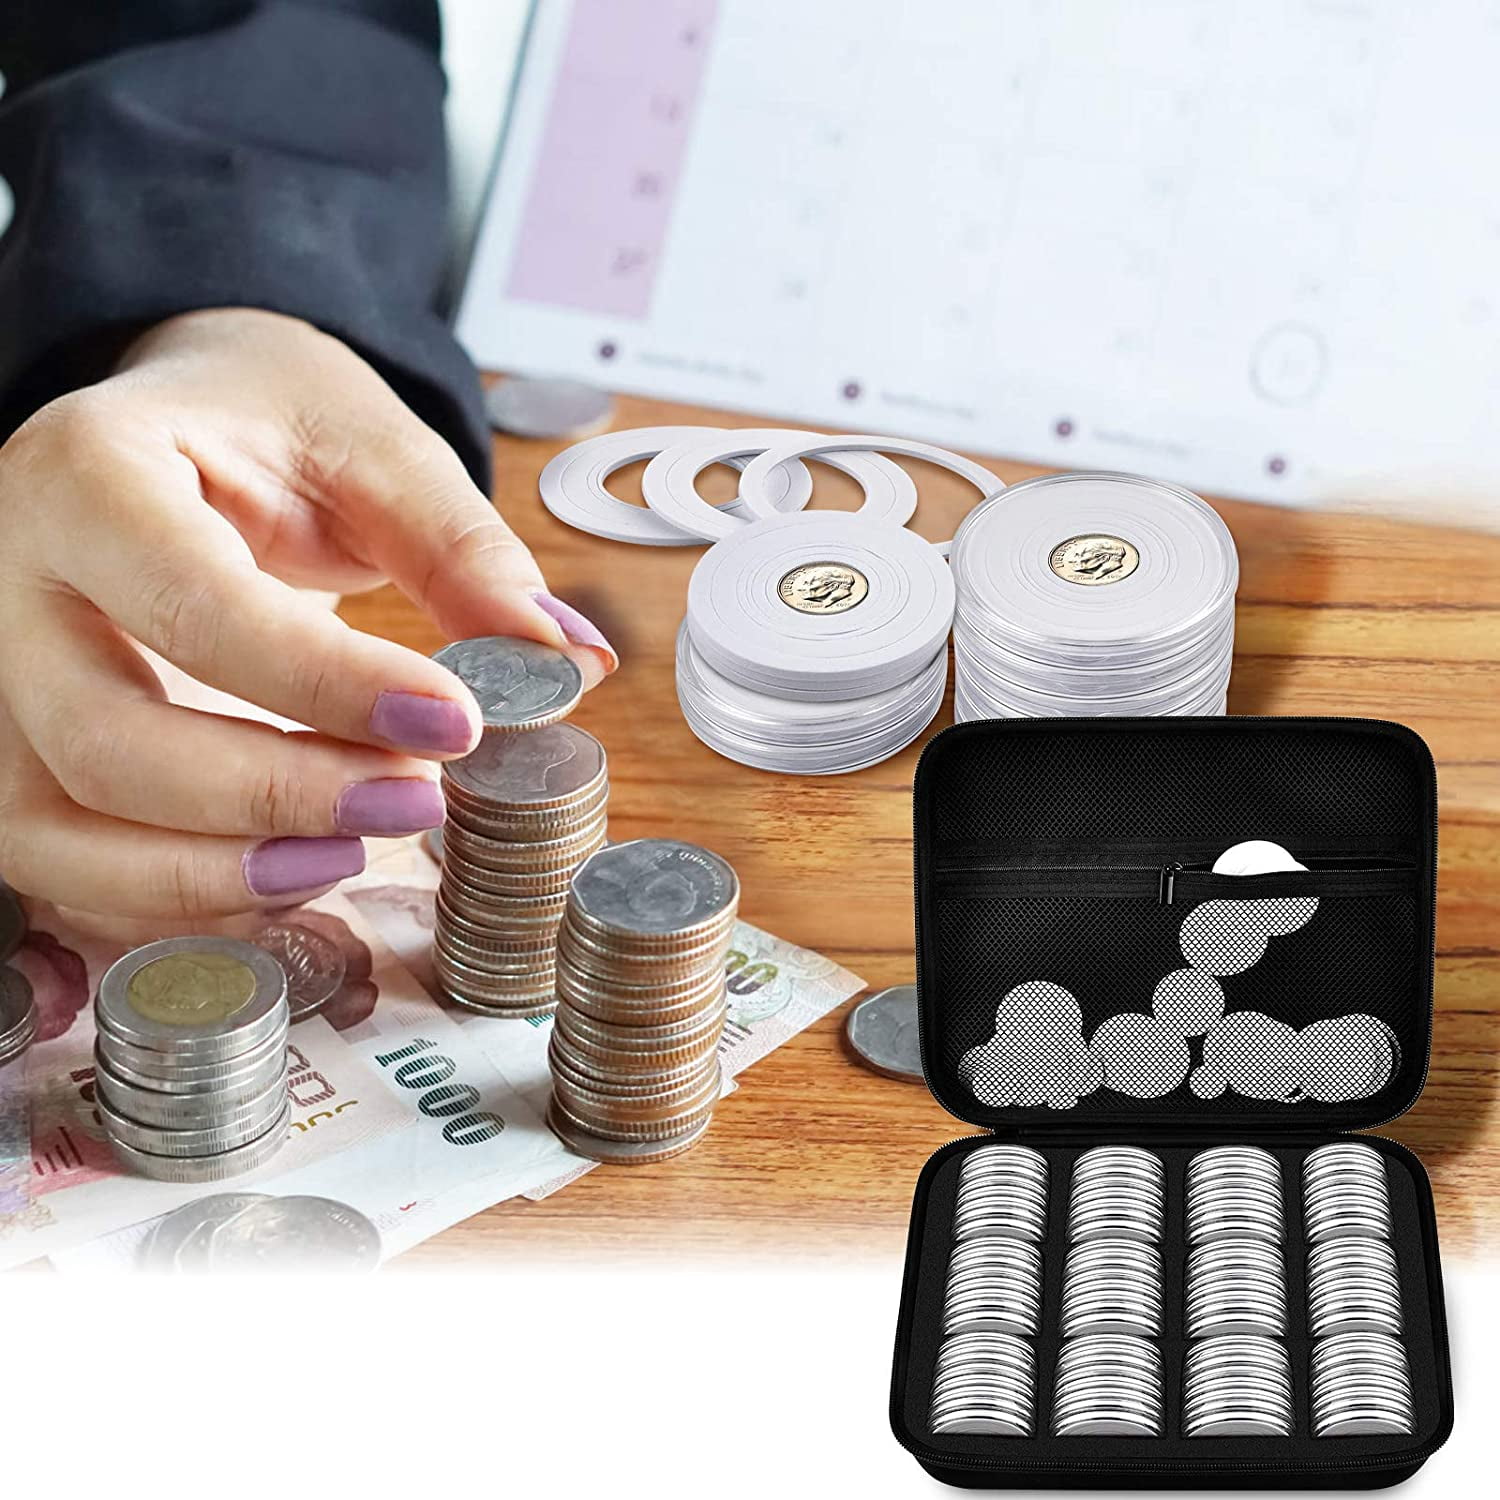 6 Sizes 96 Pieces 46mm Coin Capsules with Foam Gasket and Plastic Storage Organizer Box Coins Collector Case Holder for Coin Collection Supplies 20/25/27/30/38/46mm 